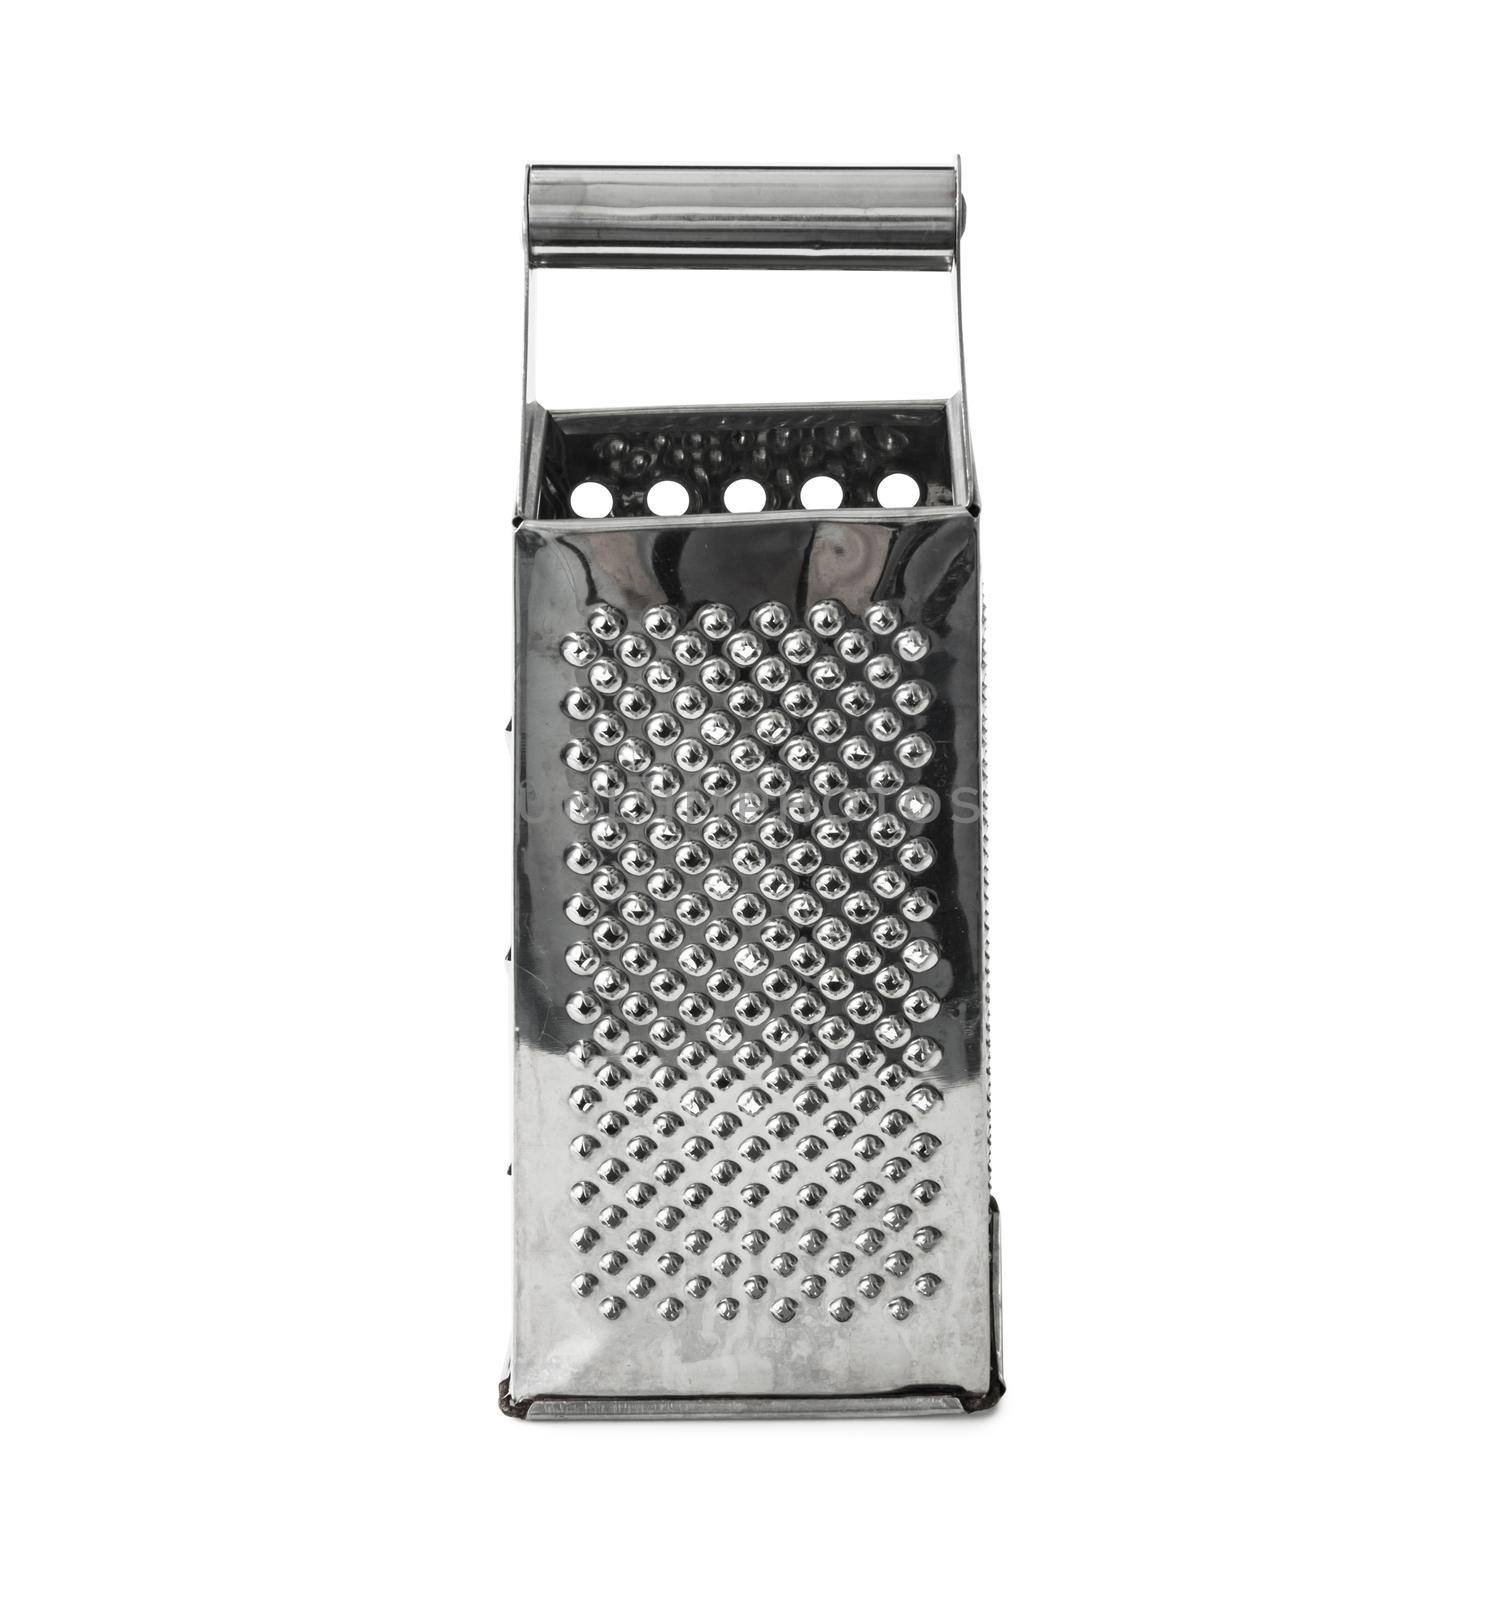 simple metal grater isolatedon white background